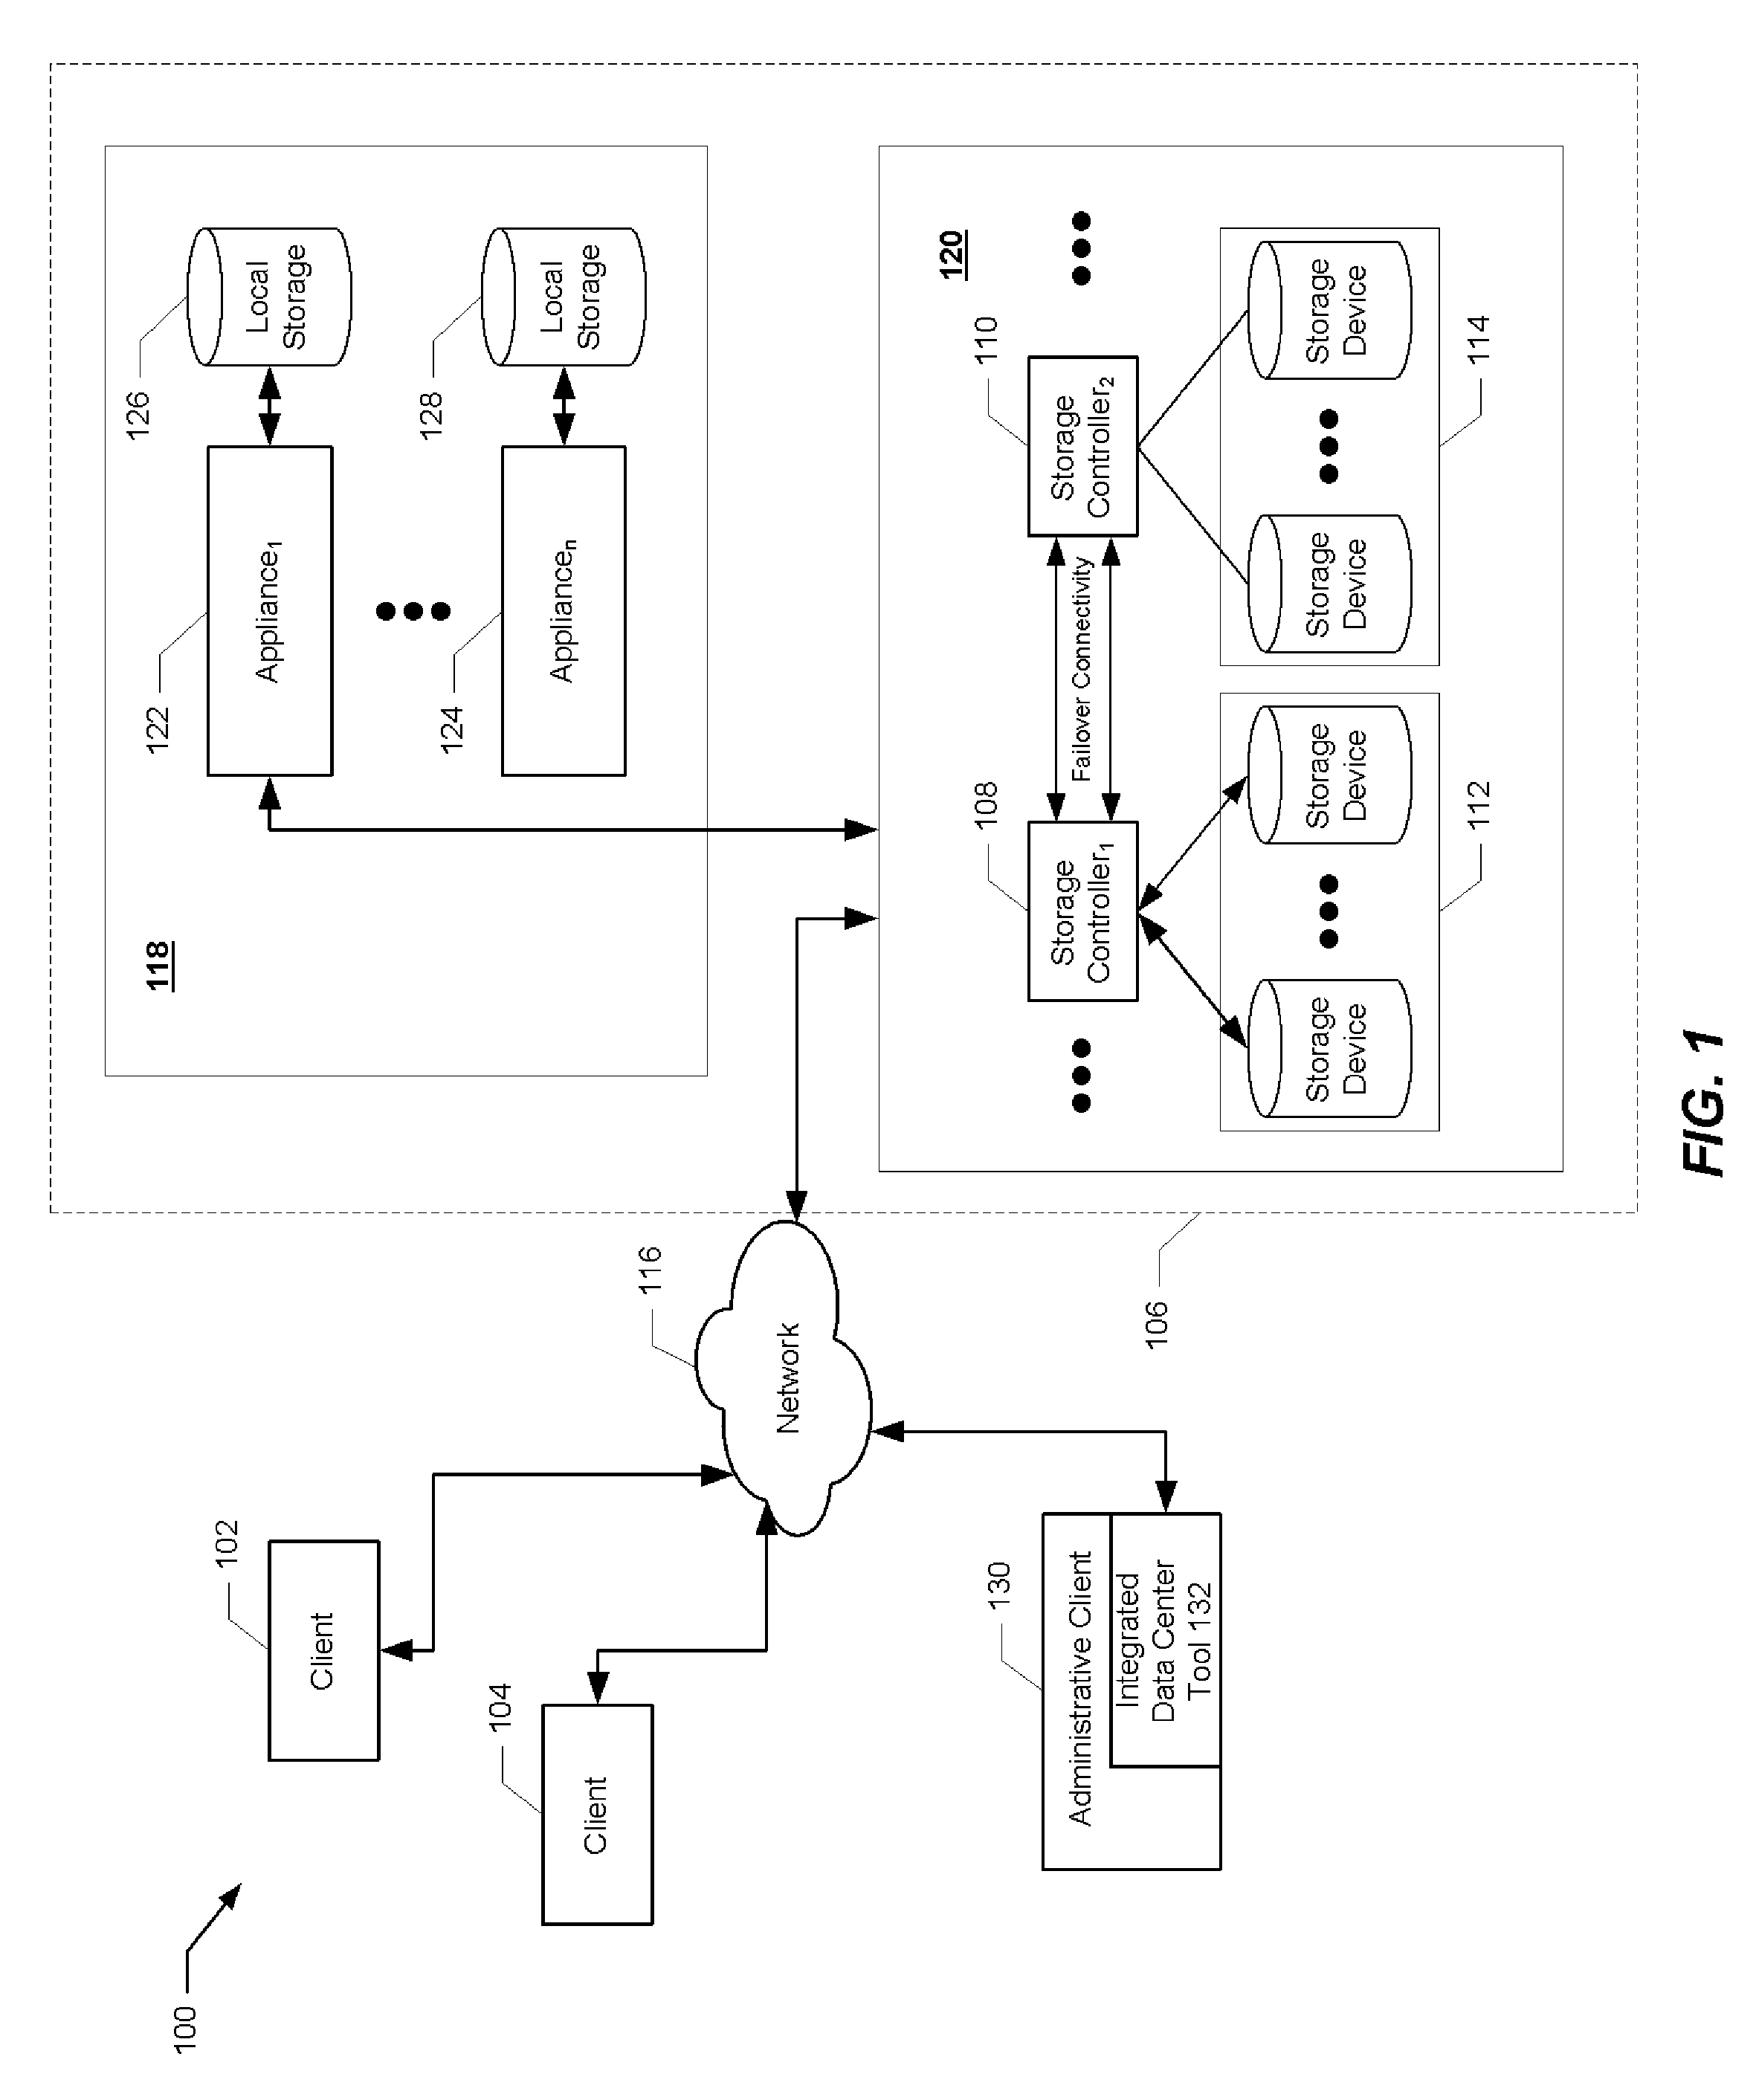 Integrated storage controller and appliance method and system